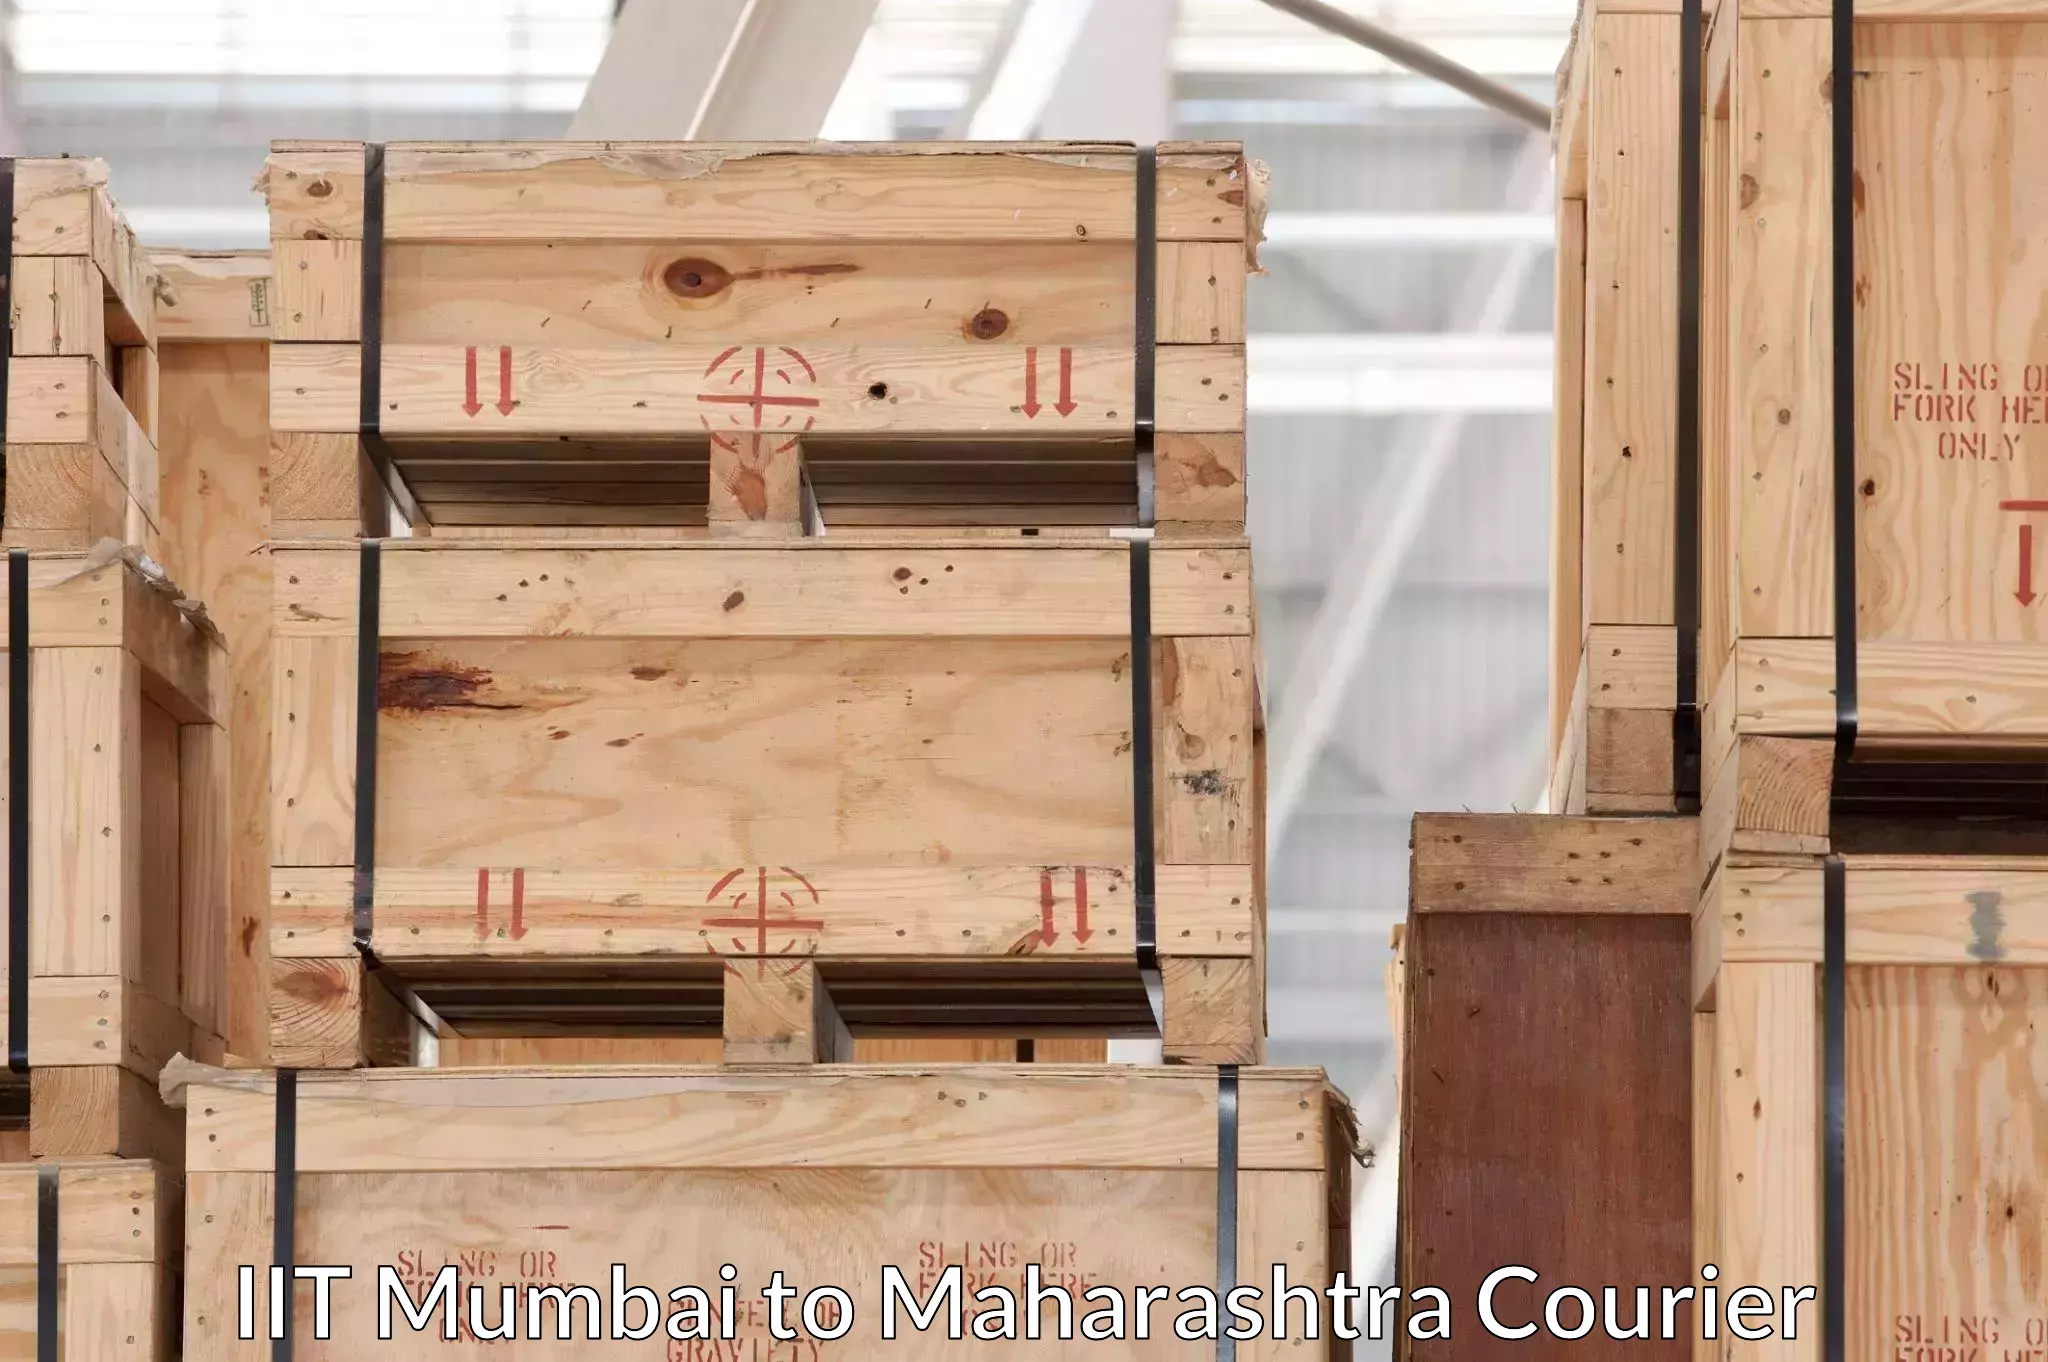 Reliable relocation services in IIT Mumbai to Mahad